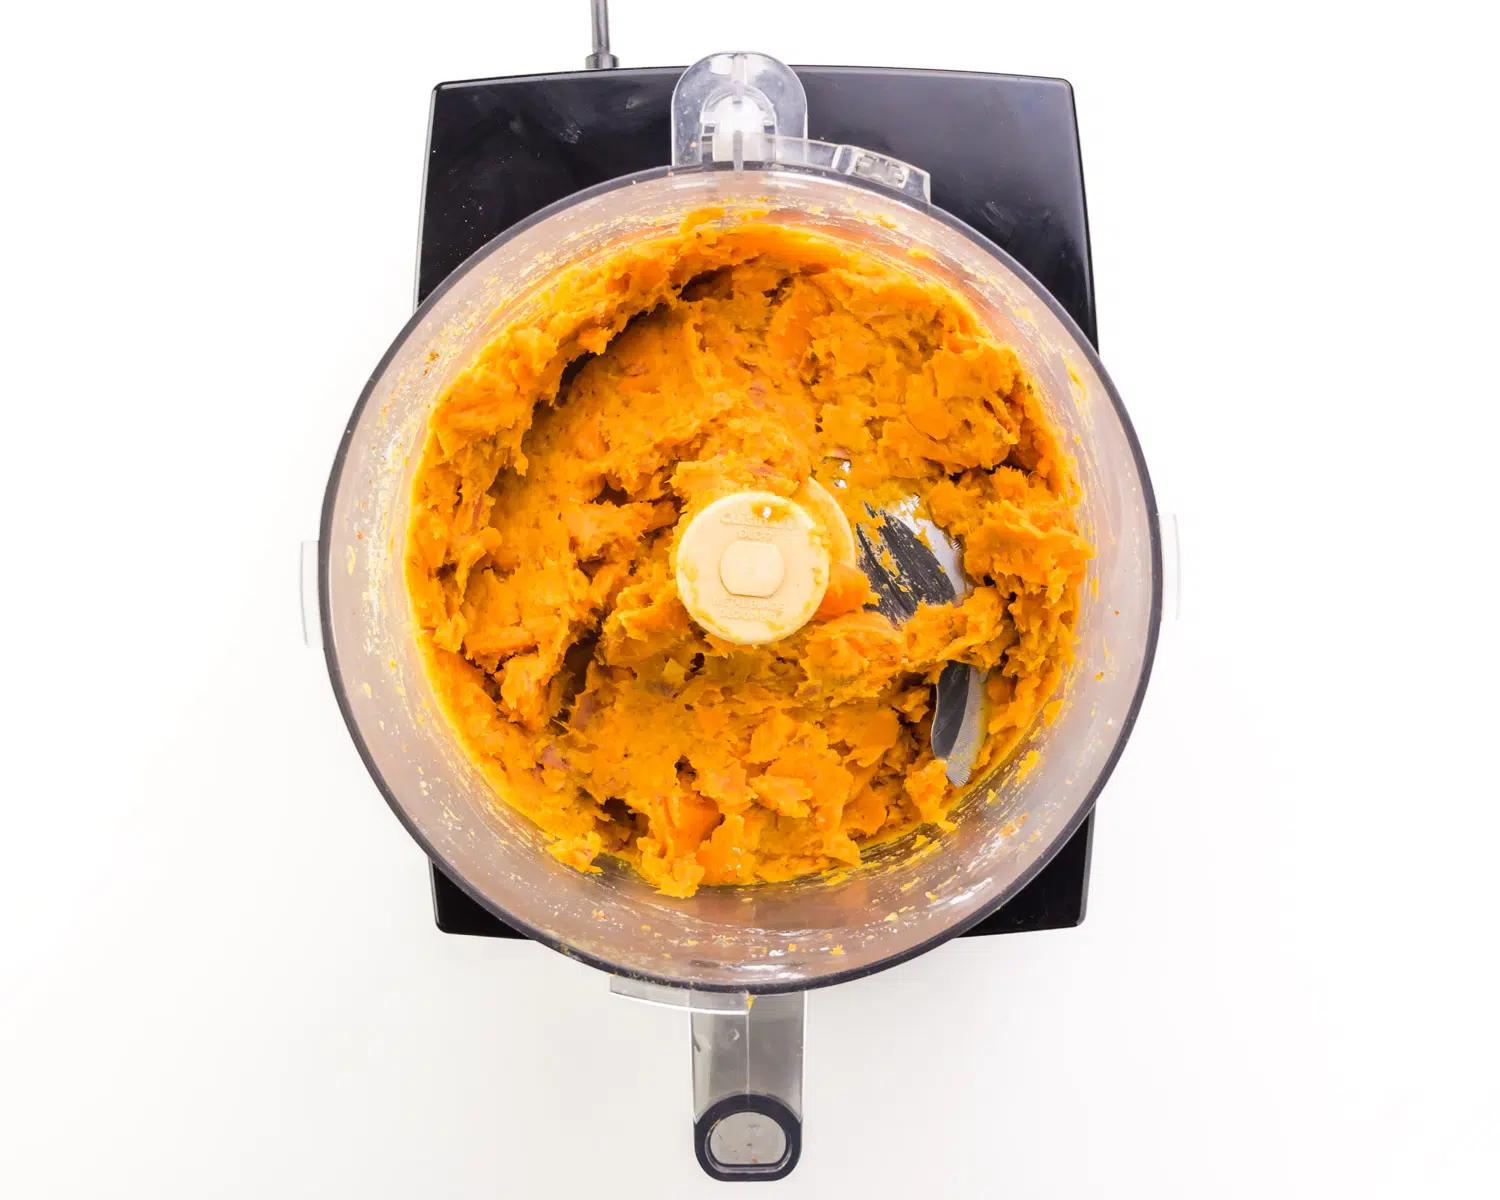 Pulsed sweet potatoes are in a food processor.